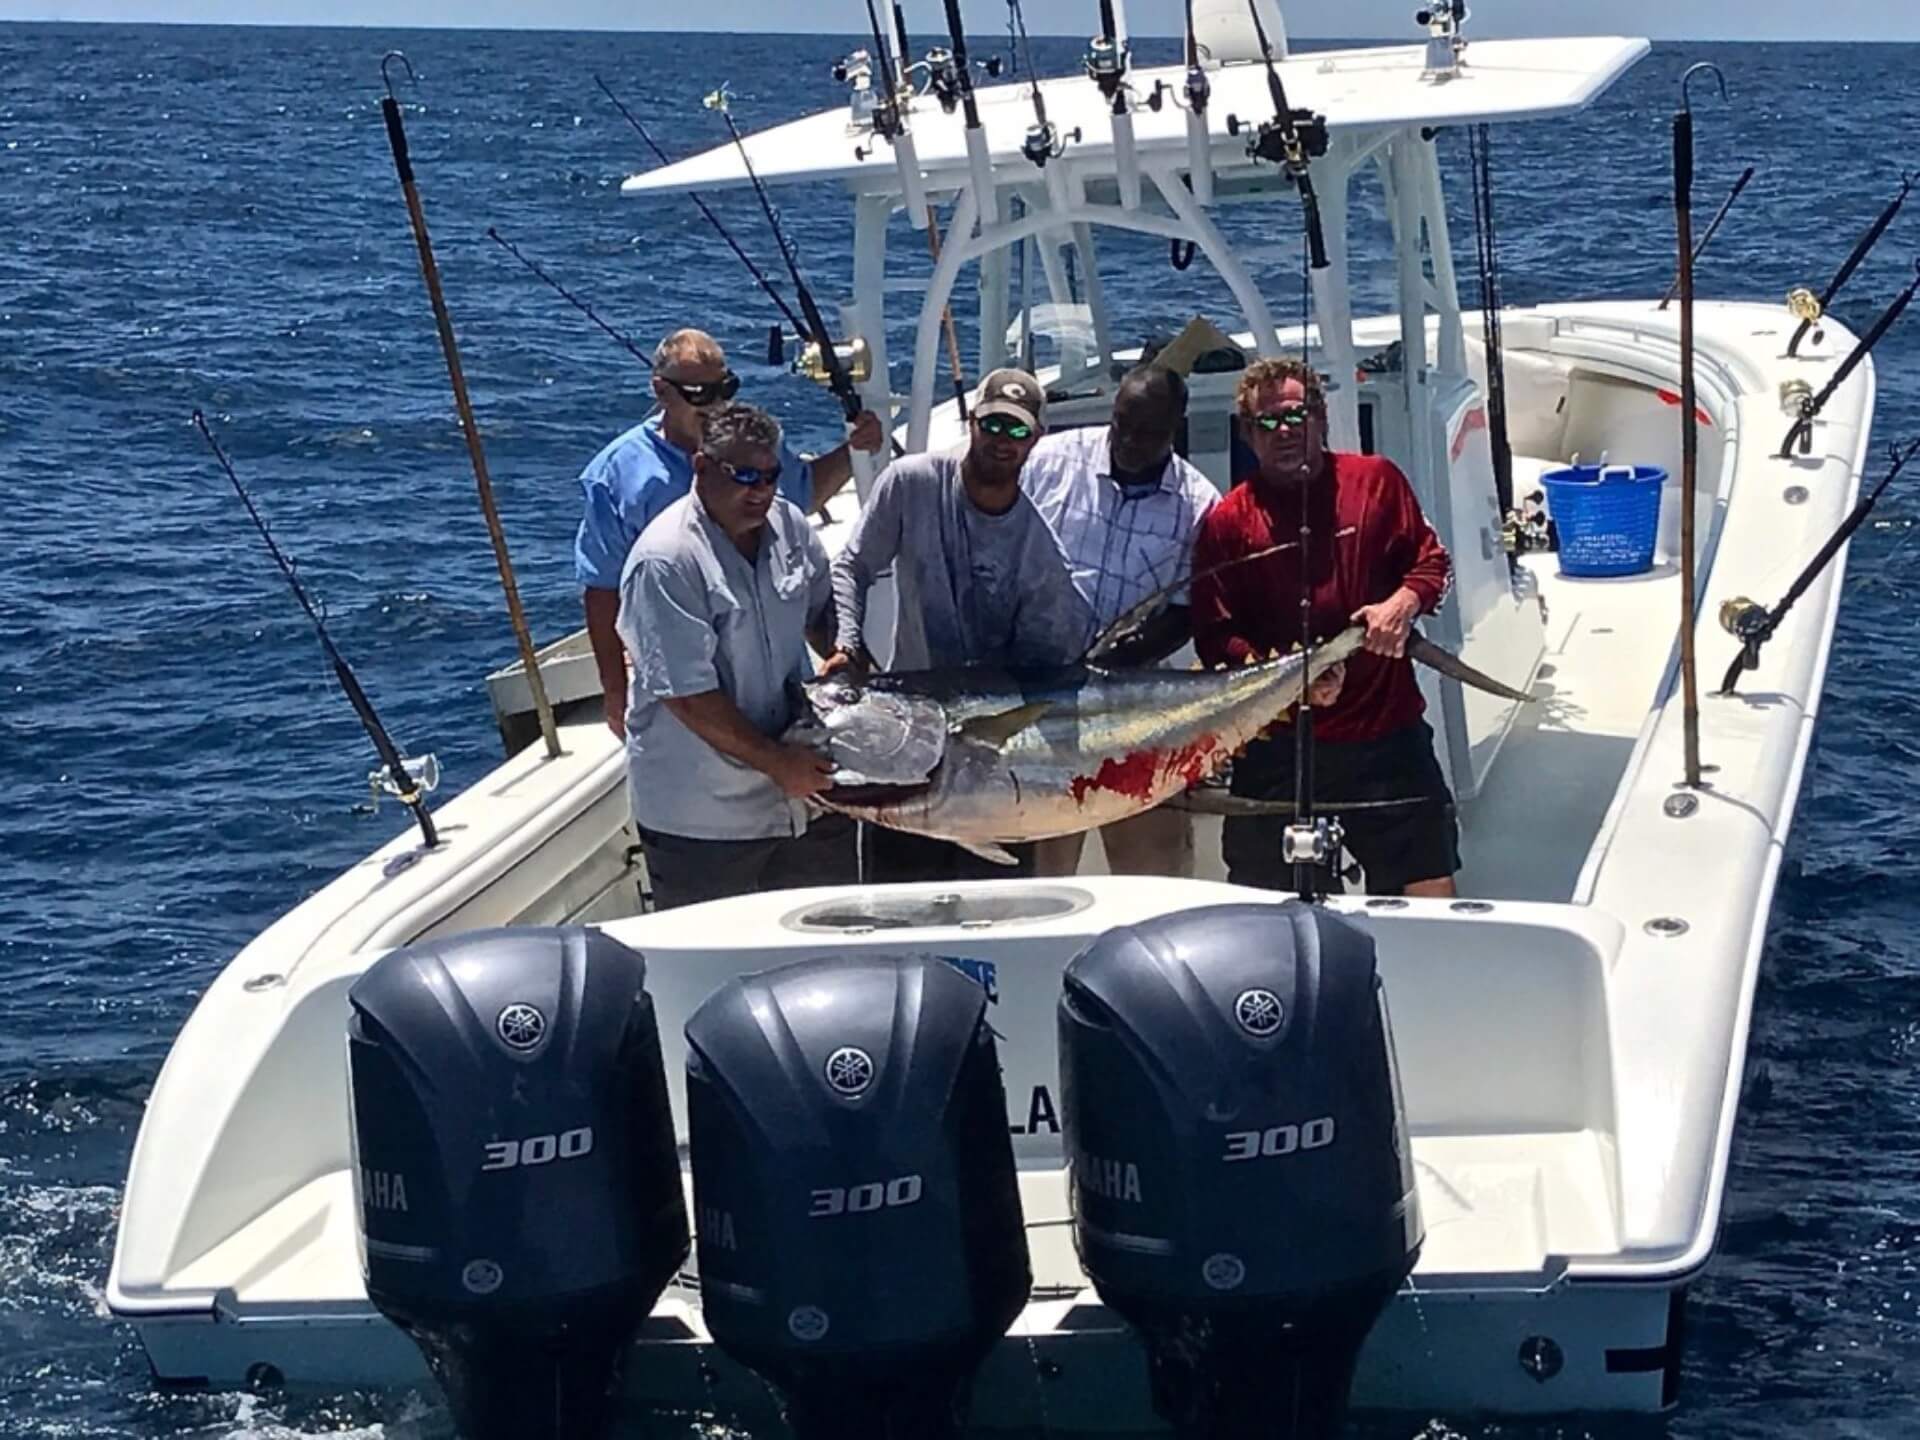 Super Strike Charters charter fishing trips with expert captains